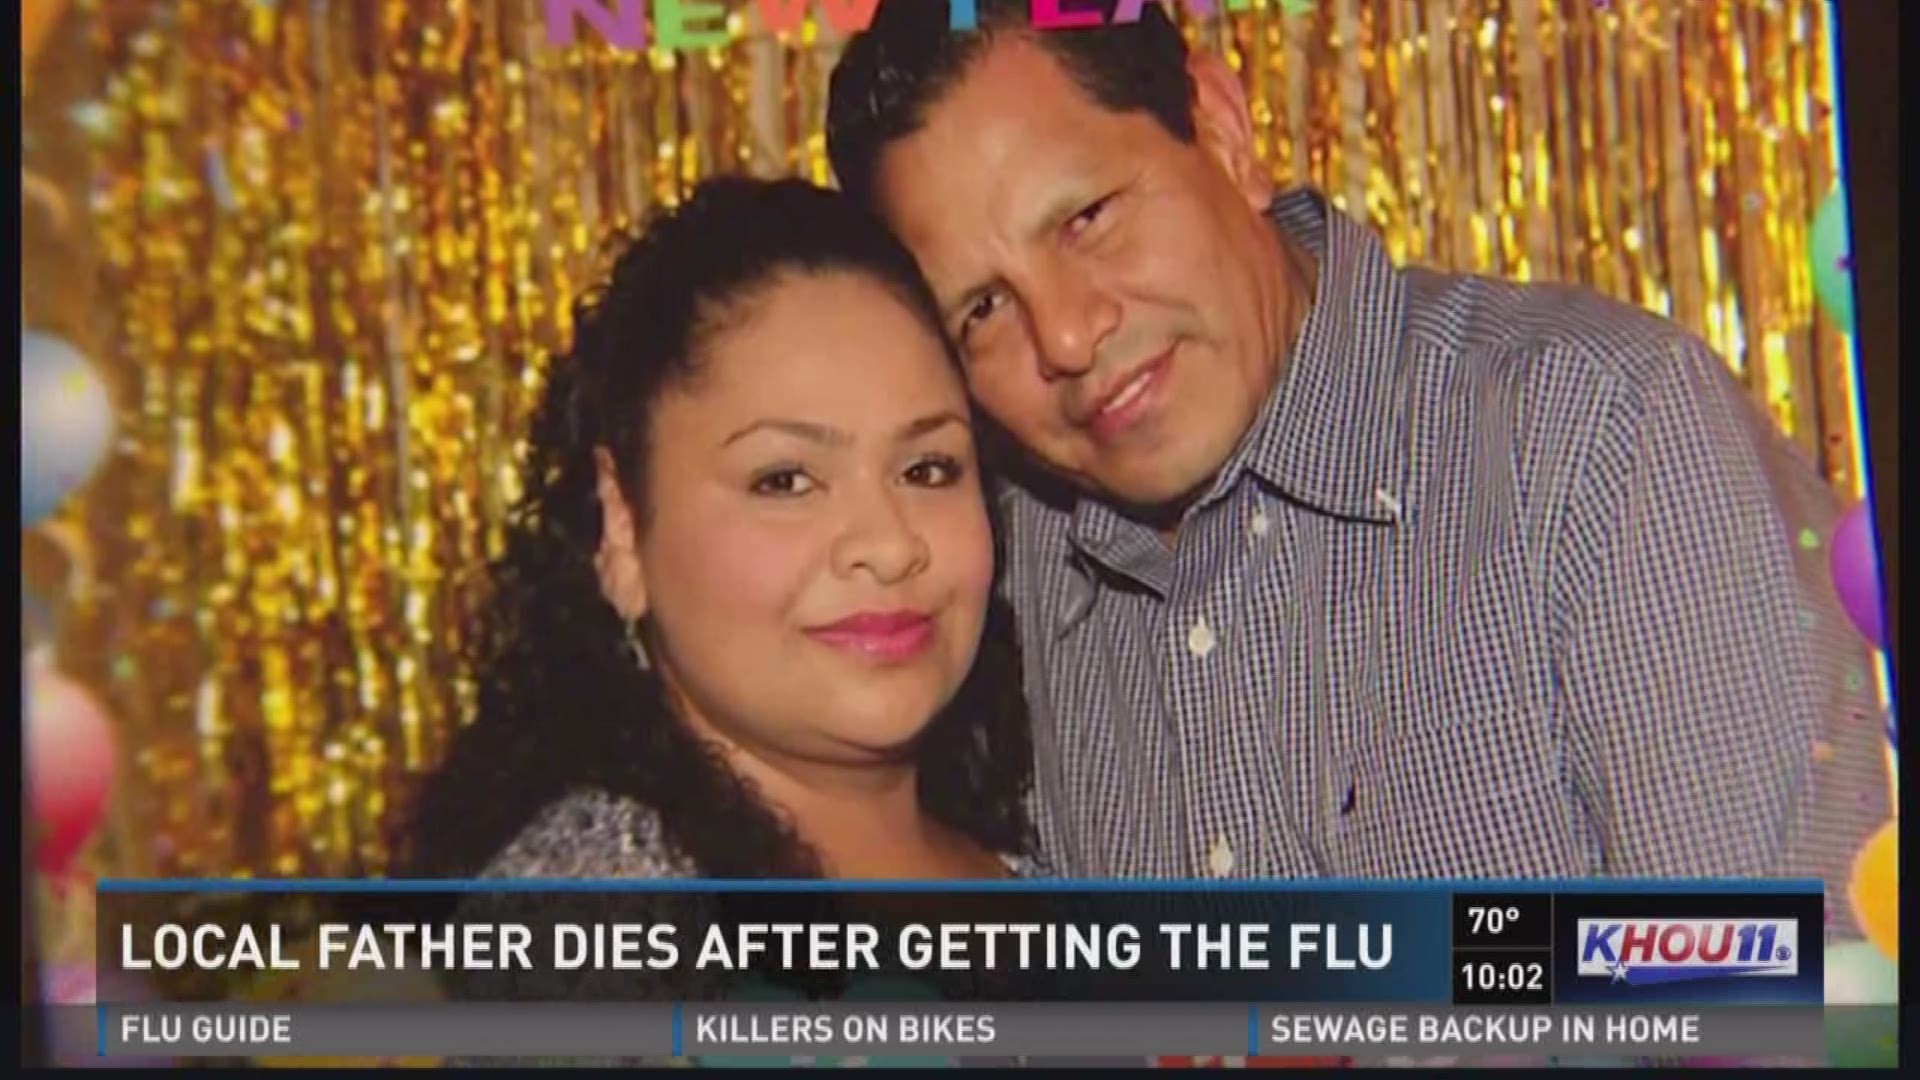 A Houston family is now having to make funeral arrangements after a 55-year-old father of five died suddenly, just days after being diagnosed with the flu.